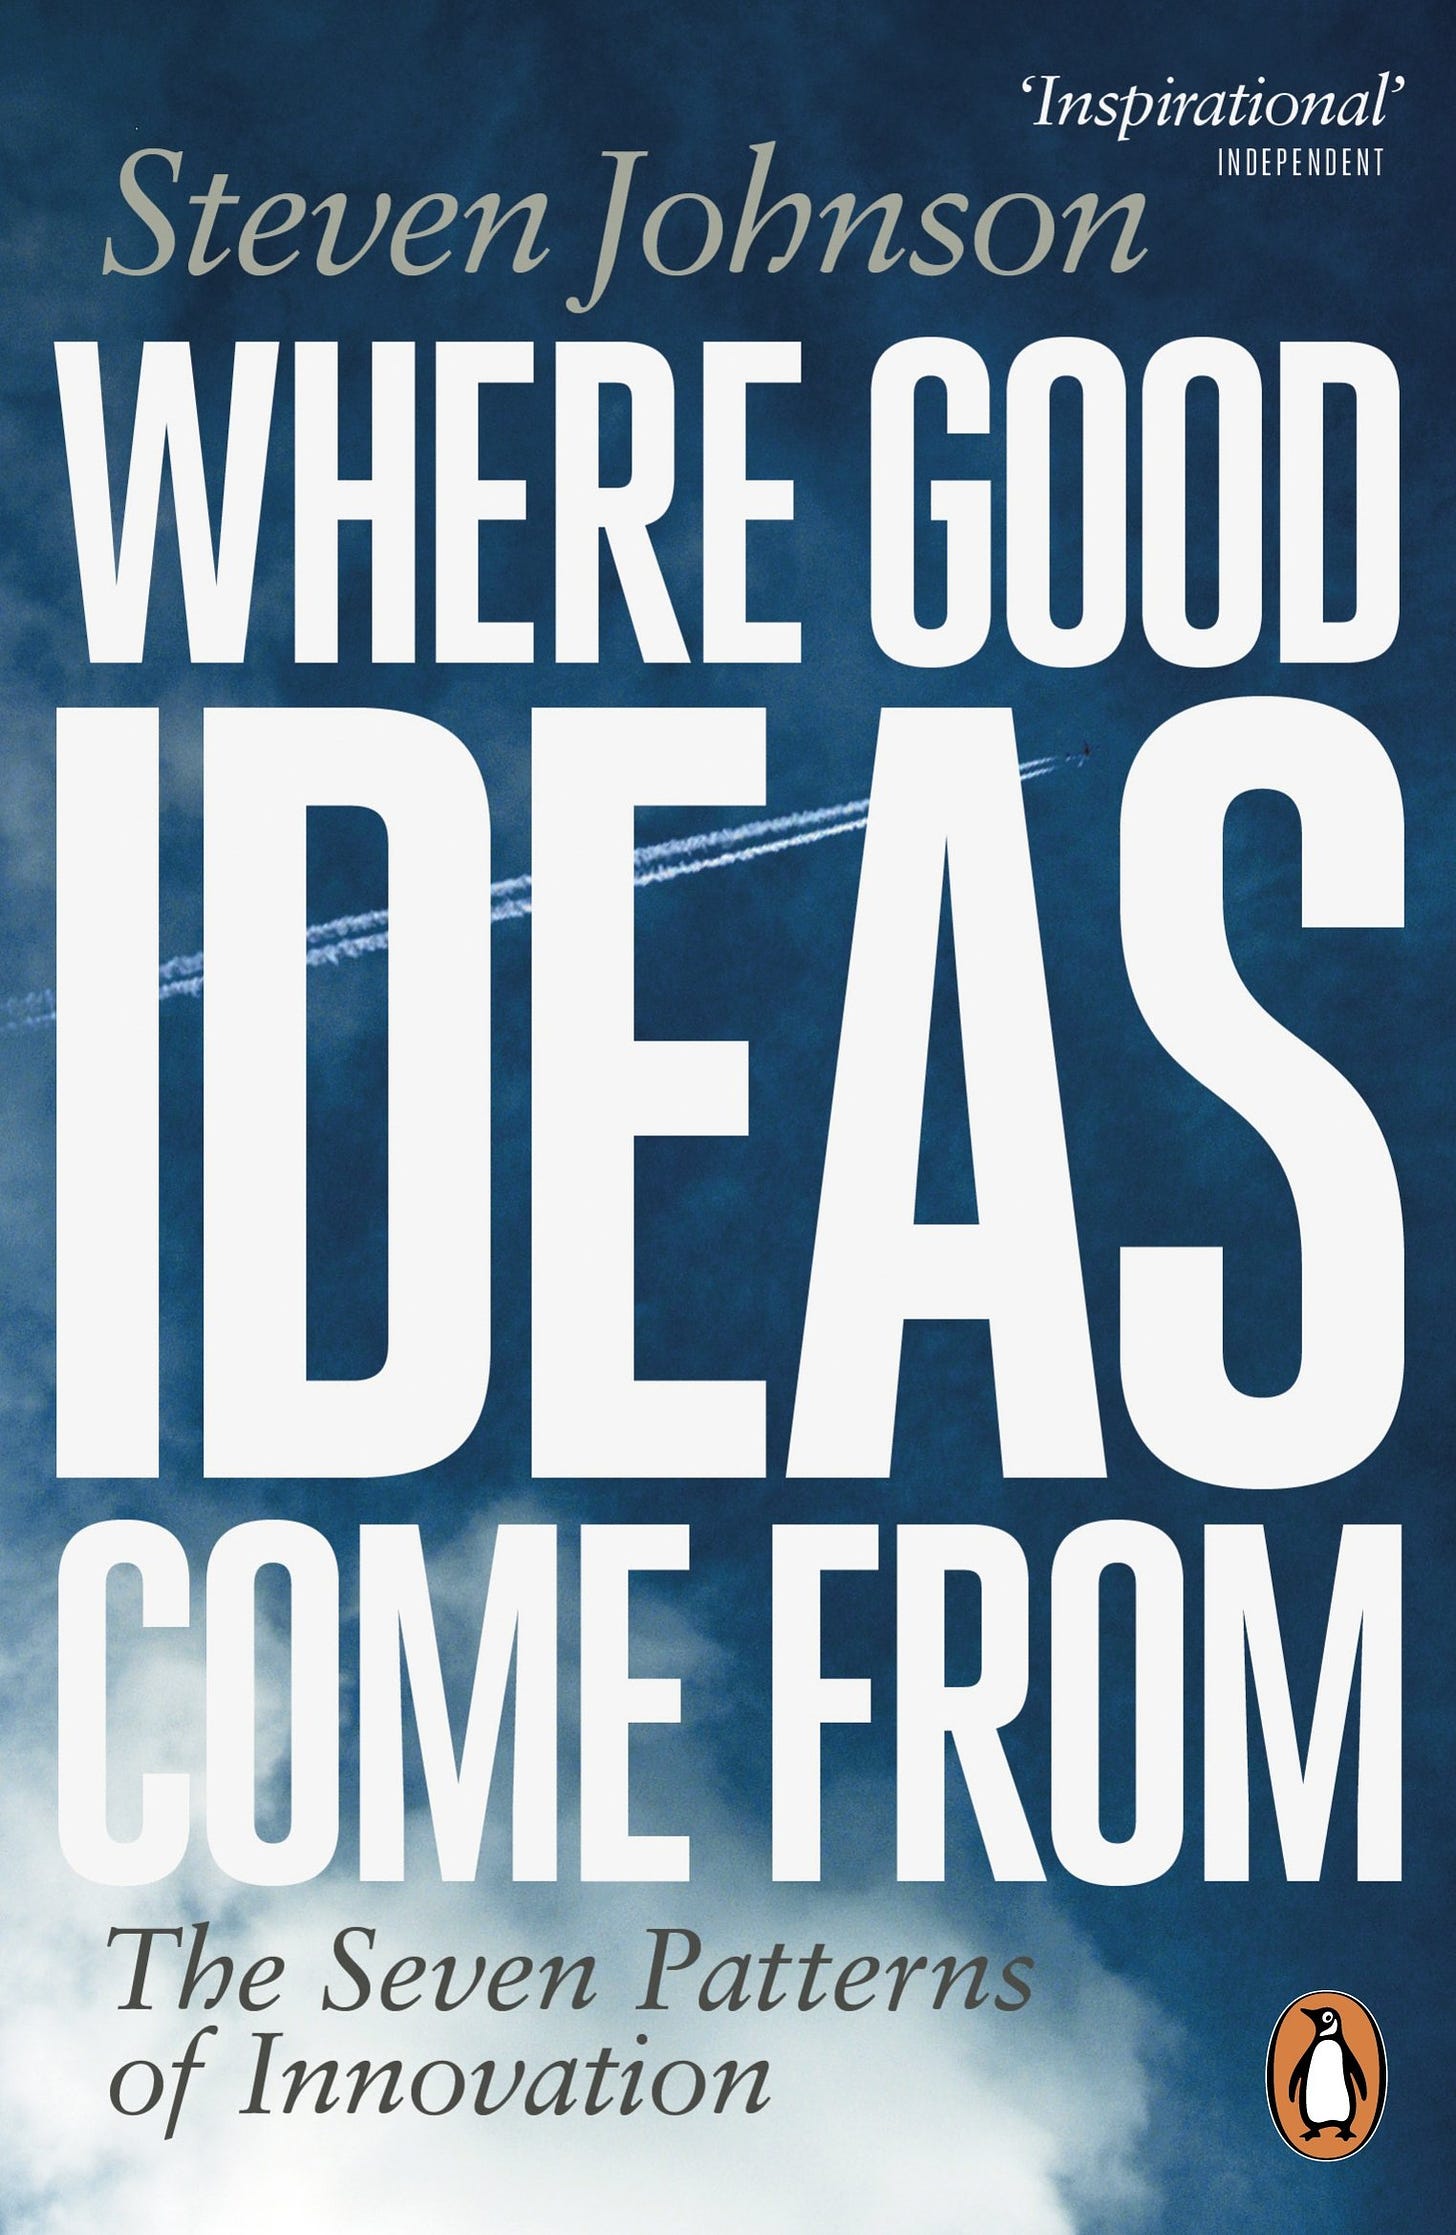 Where Good Ideas Come From: The Seven Patterns of Innovation: Amazon.co.uk:  Johnson, Steven: 9780141033402: Books